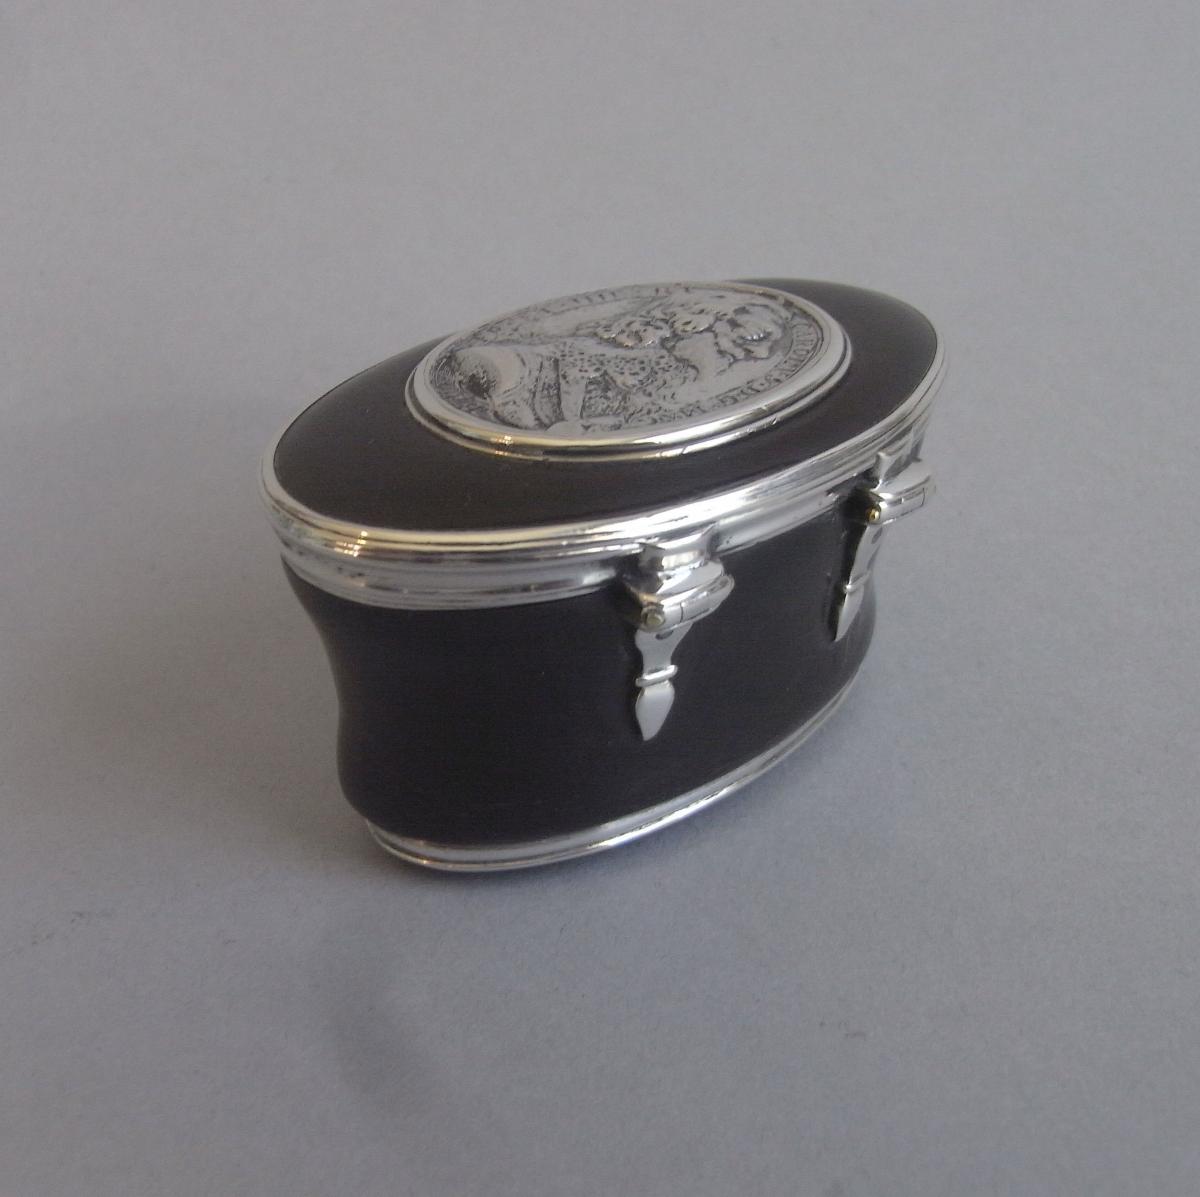 An important William III silver mounted Tortoiseshell Commemorative Standing Snuff Canister, inset with a cast Commonwealth Roya